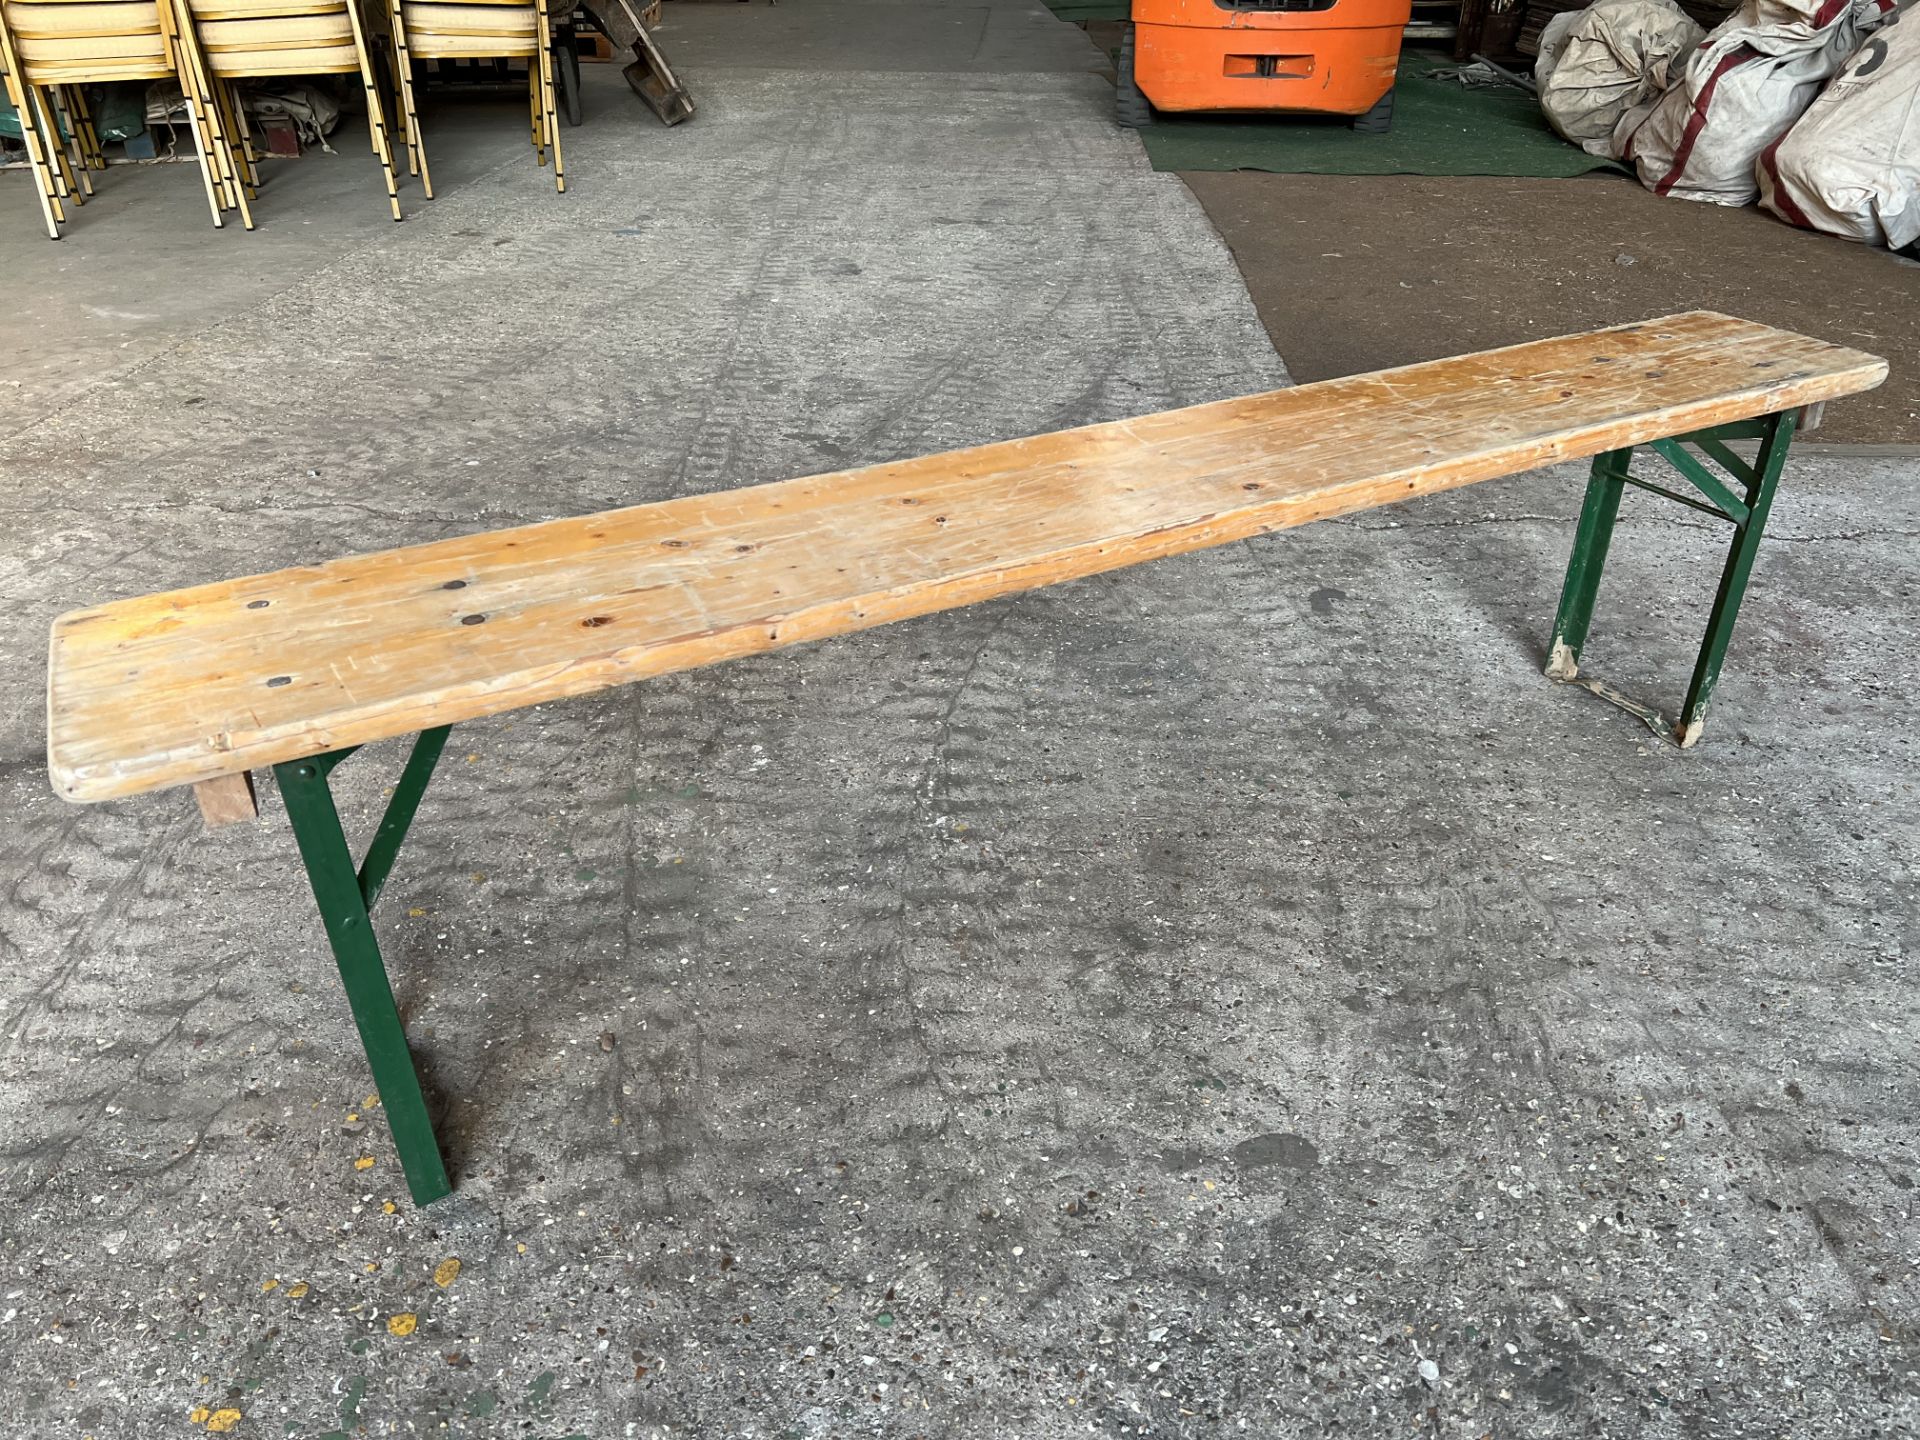 10 no 6ft long wooden benches with metal folding legs. This lot is subject to VAT